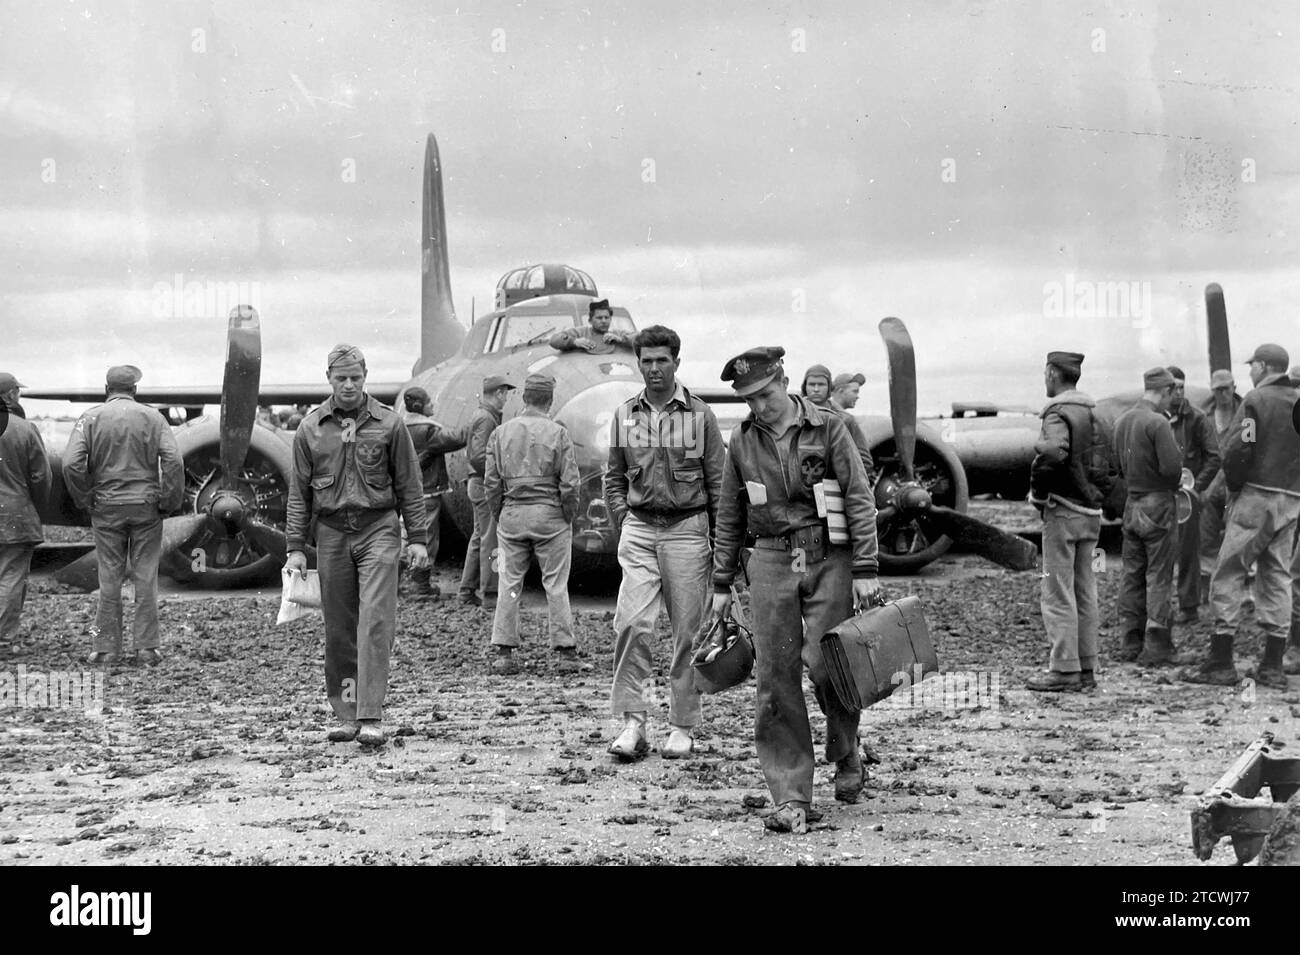 A B-17 0F THE USAAF flying from a base in North Africa in 1943 to attack targets in the Mediterranean had its undercarriage damaged on the mission. Nick-named Cotton Eyed Joe it made a successful crash landing on return. Stock Photo